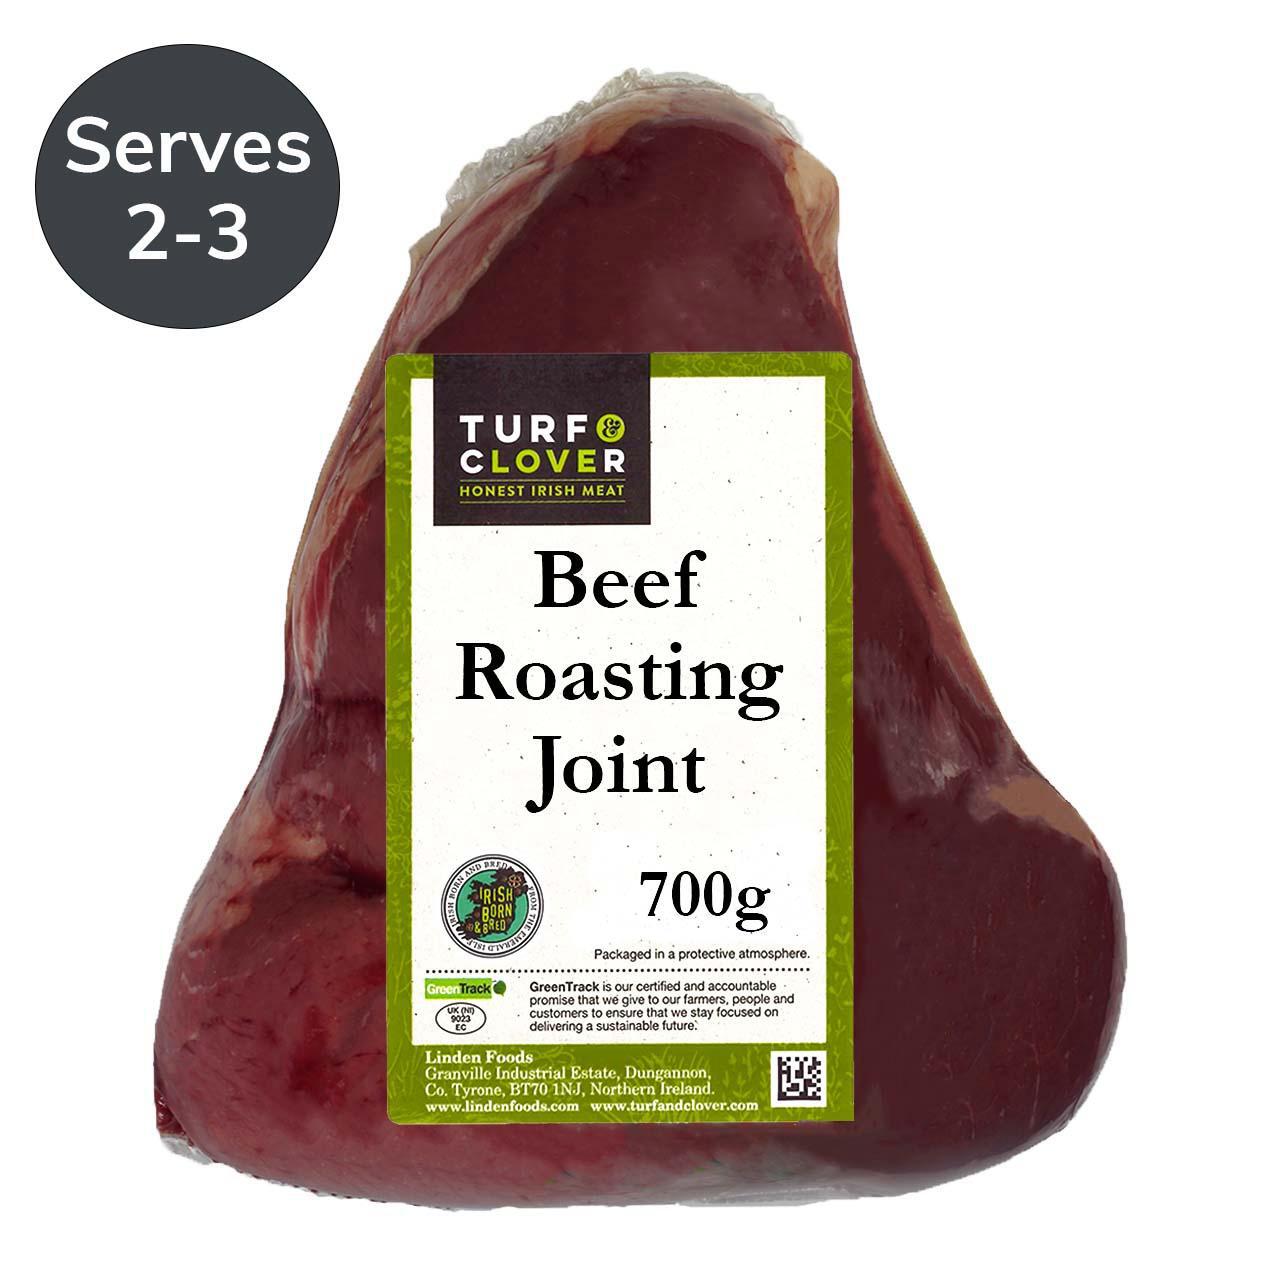 Turf & Clover Beef Roasting Joint 700g